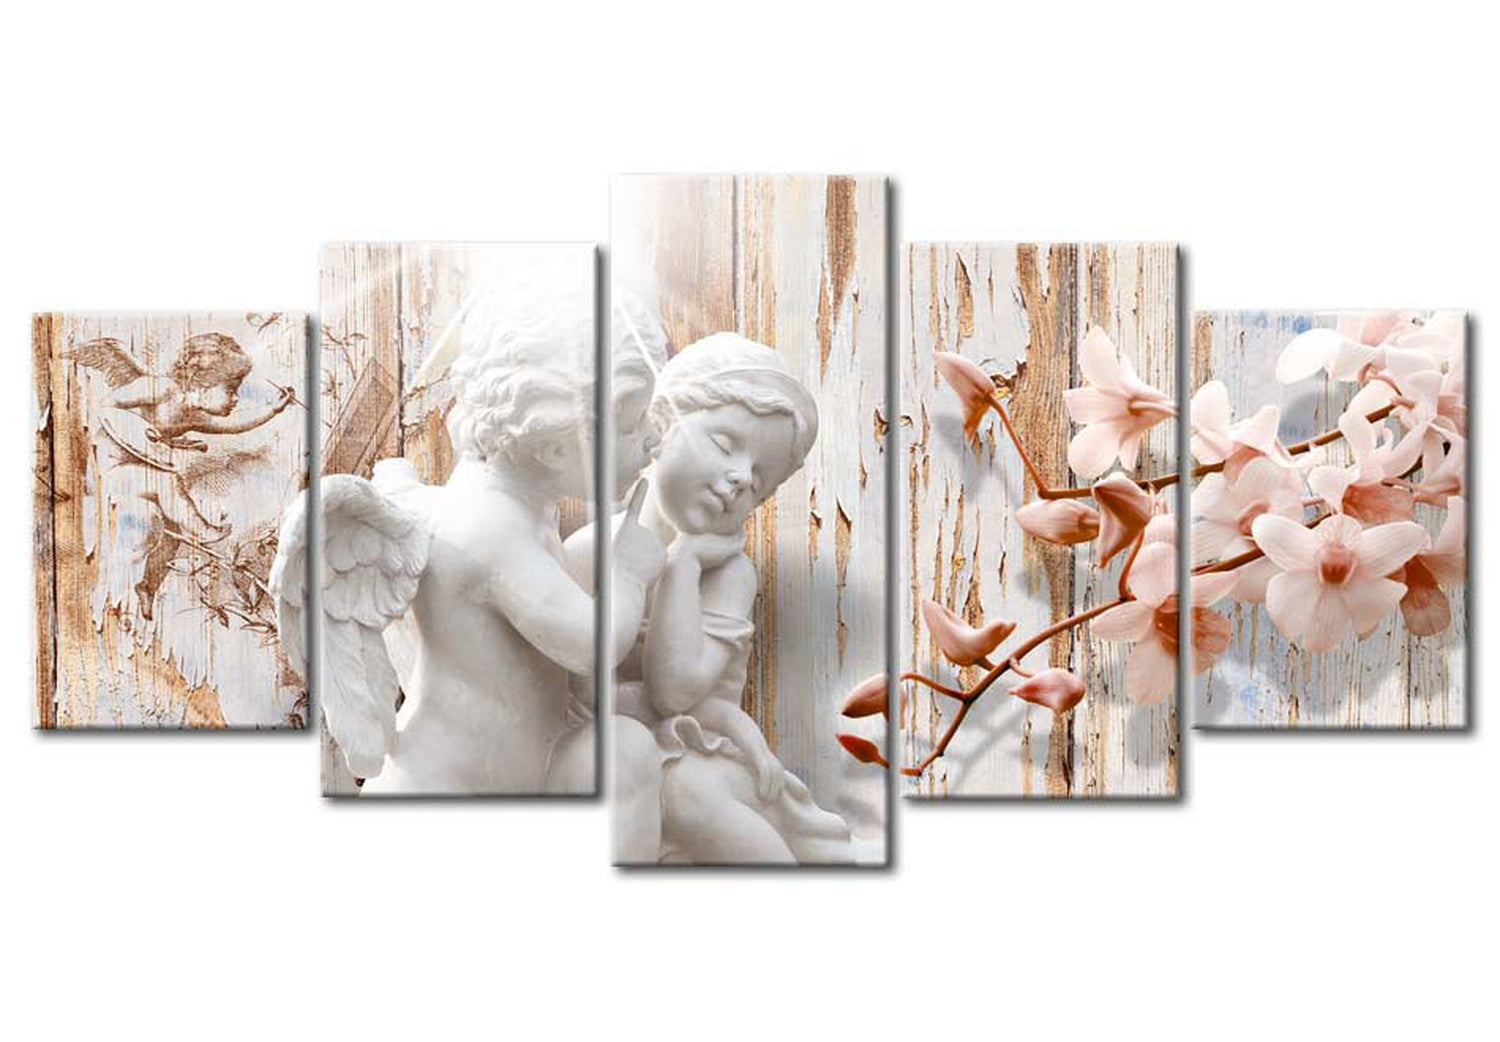 Vintage Canvas Wall Art - Loving Angels - 5 Pieces